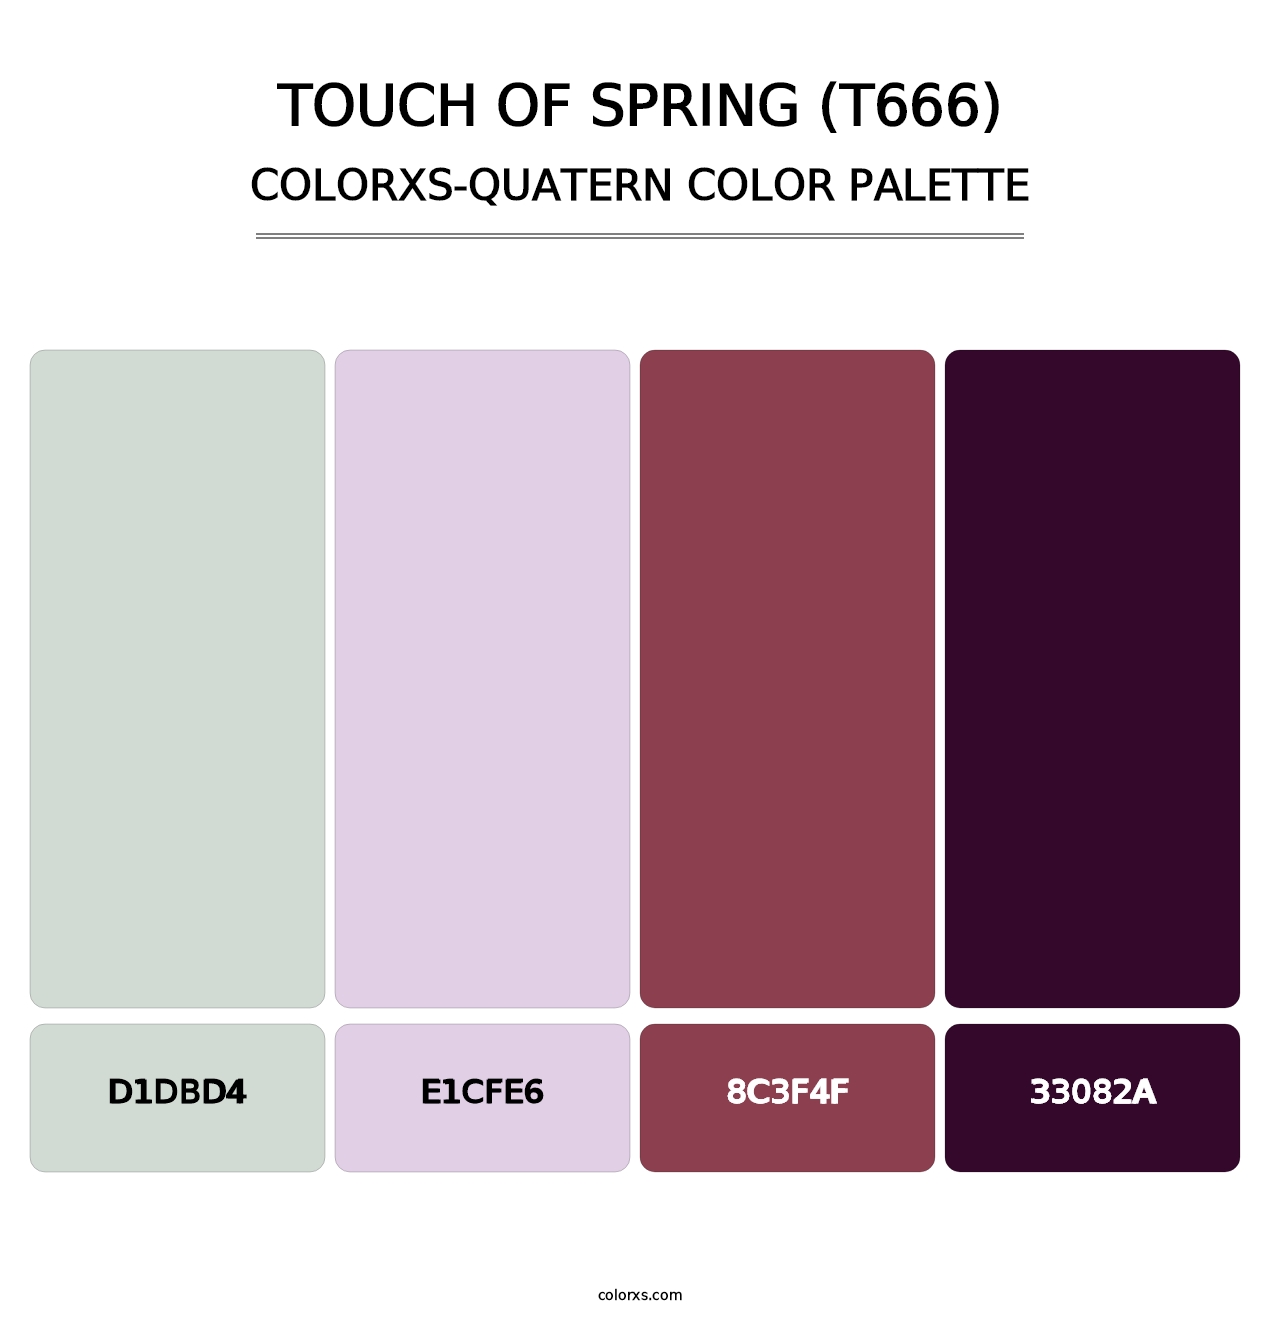 Touch of Spring (T666) - Colorxs Quatern Palette